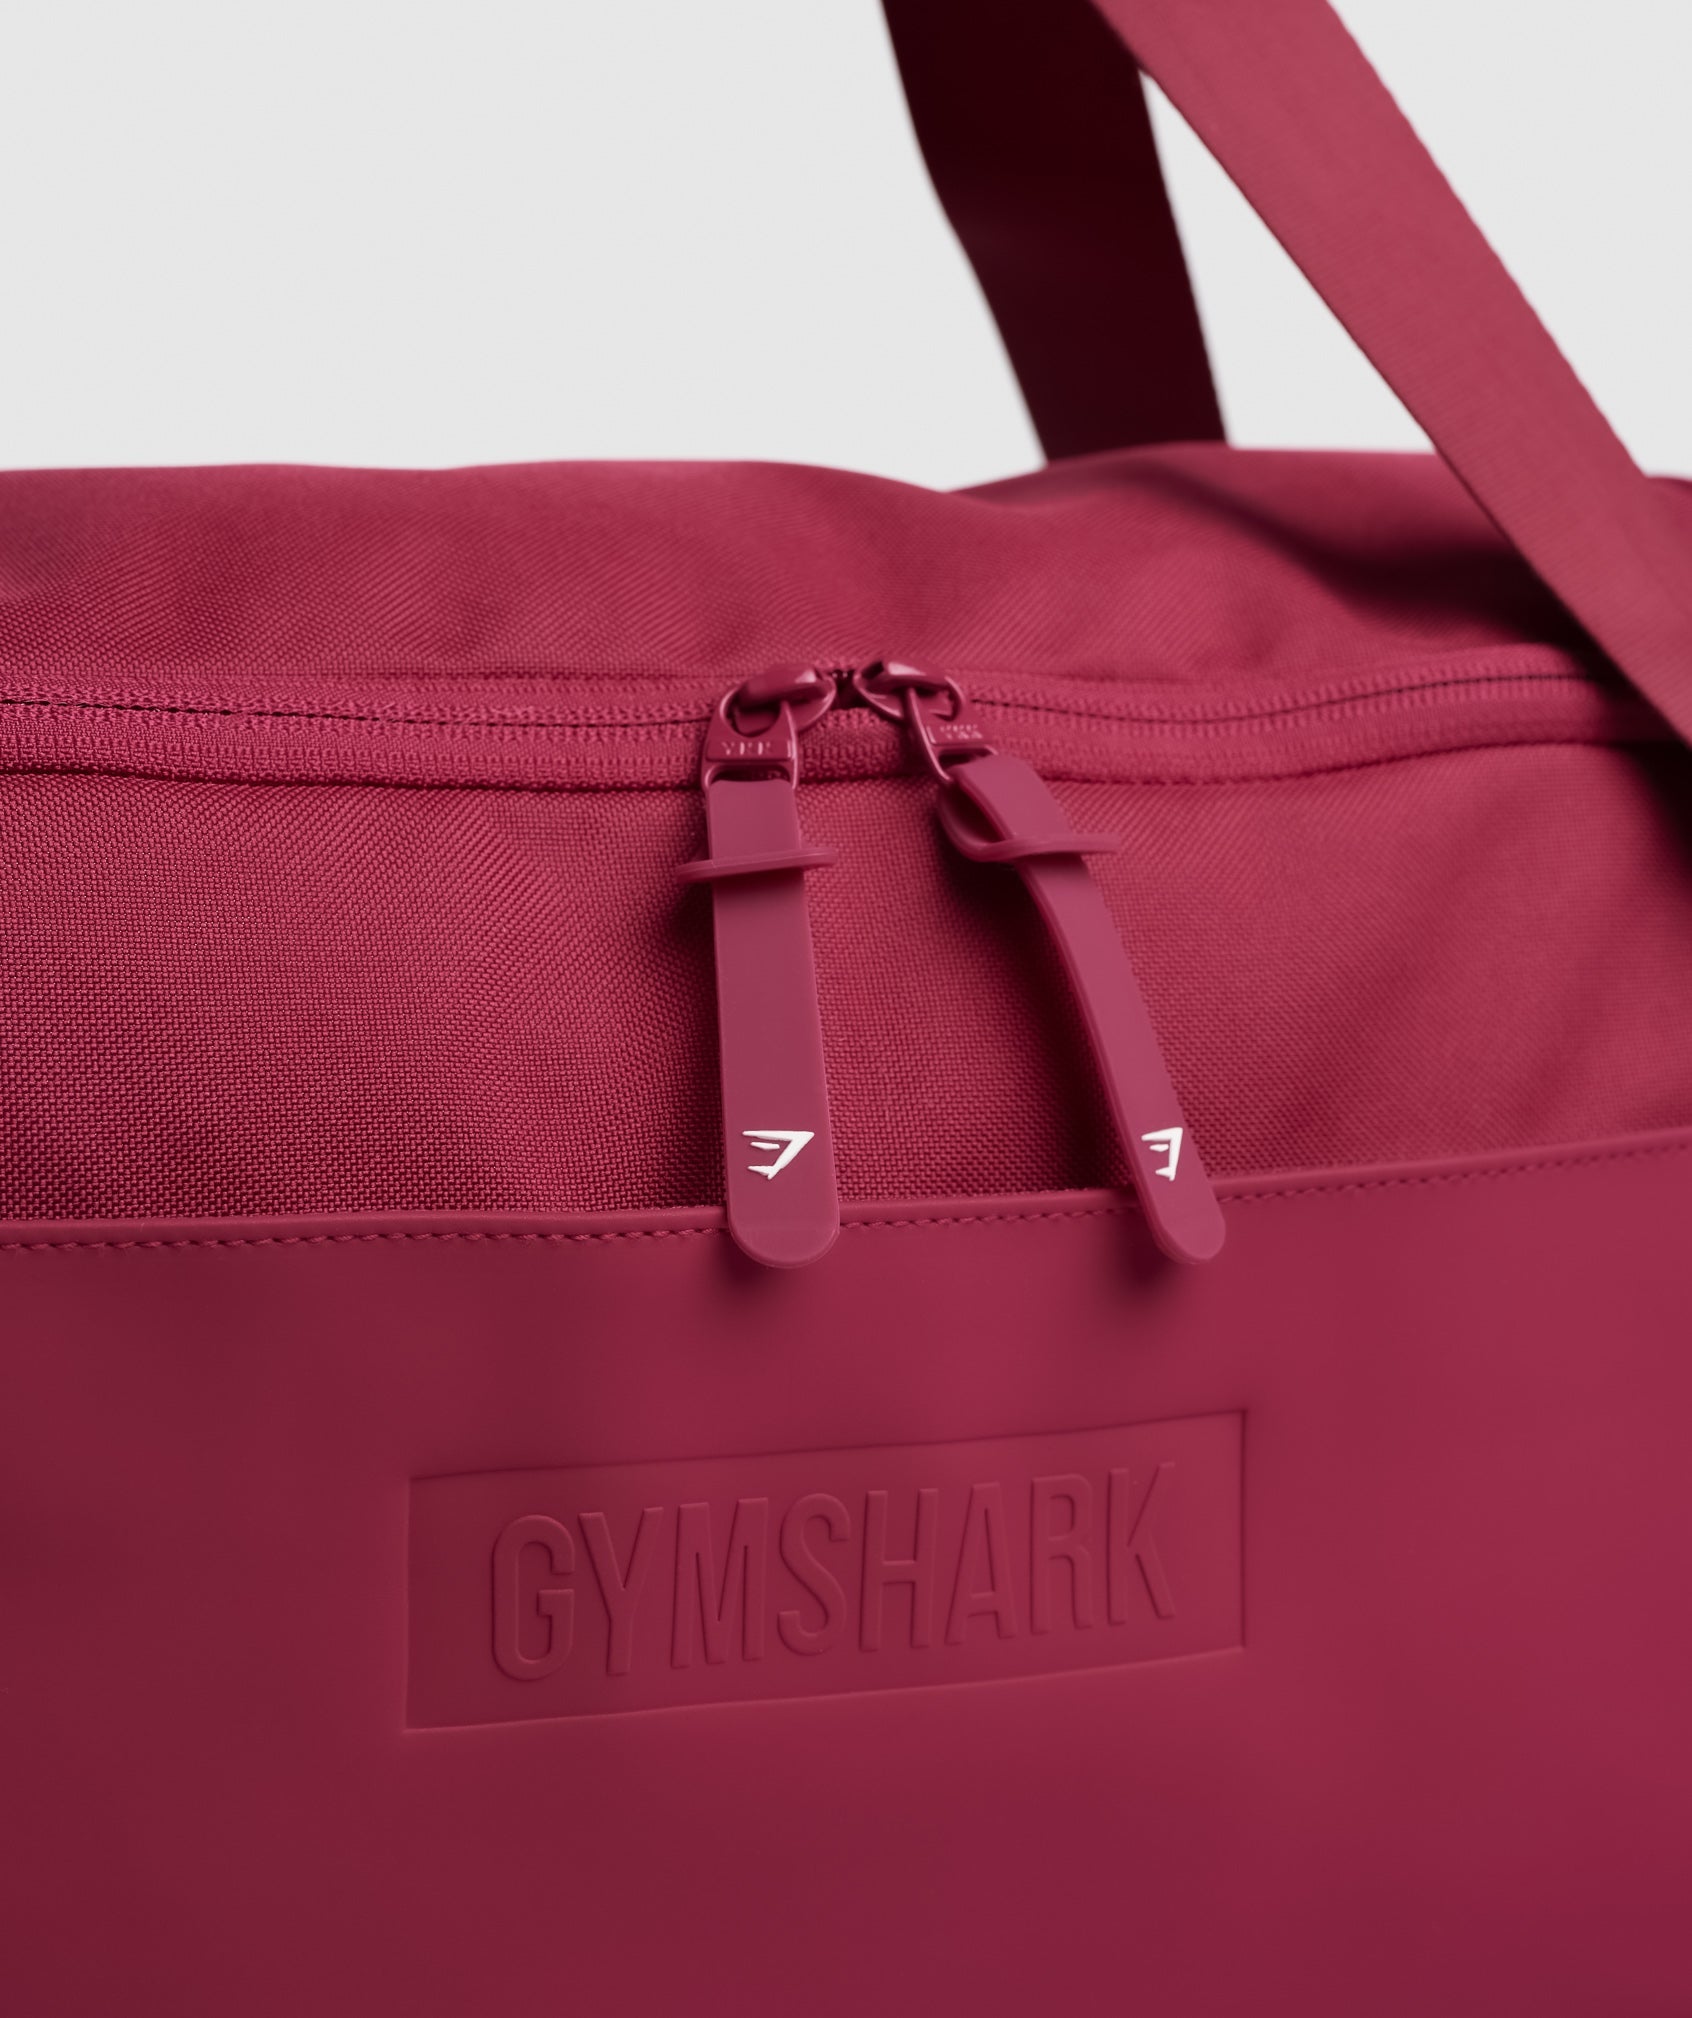 Everyday Gym Bag Small in Raspberry Pink - view 3